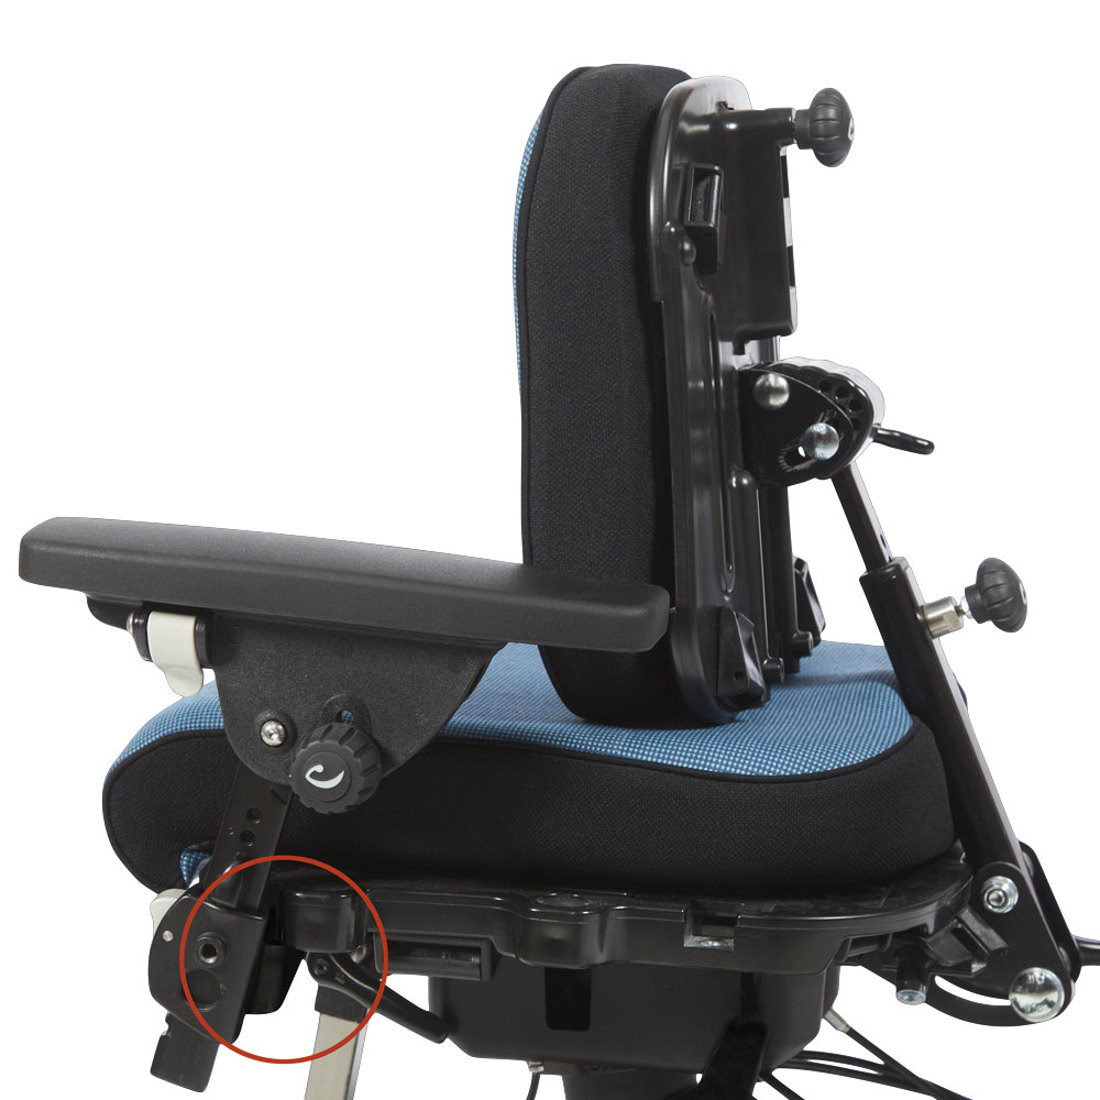 Holder for mounting x:panda arm supports at seat front - attached